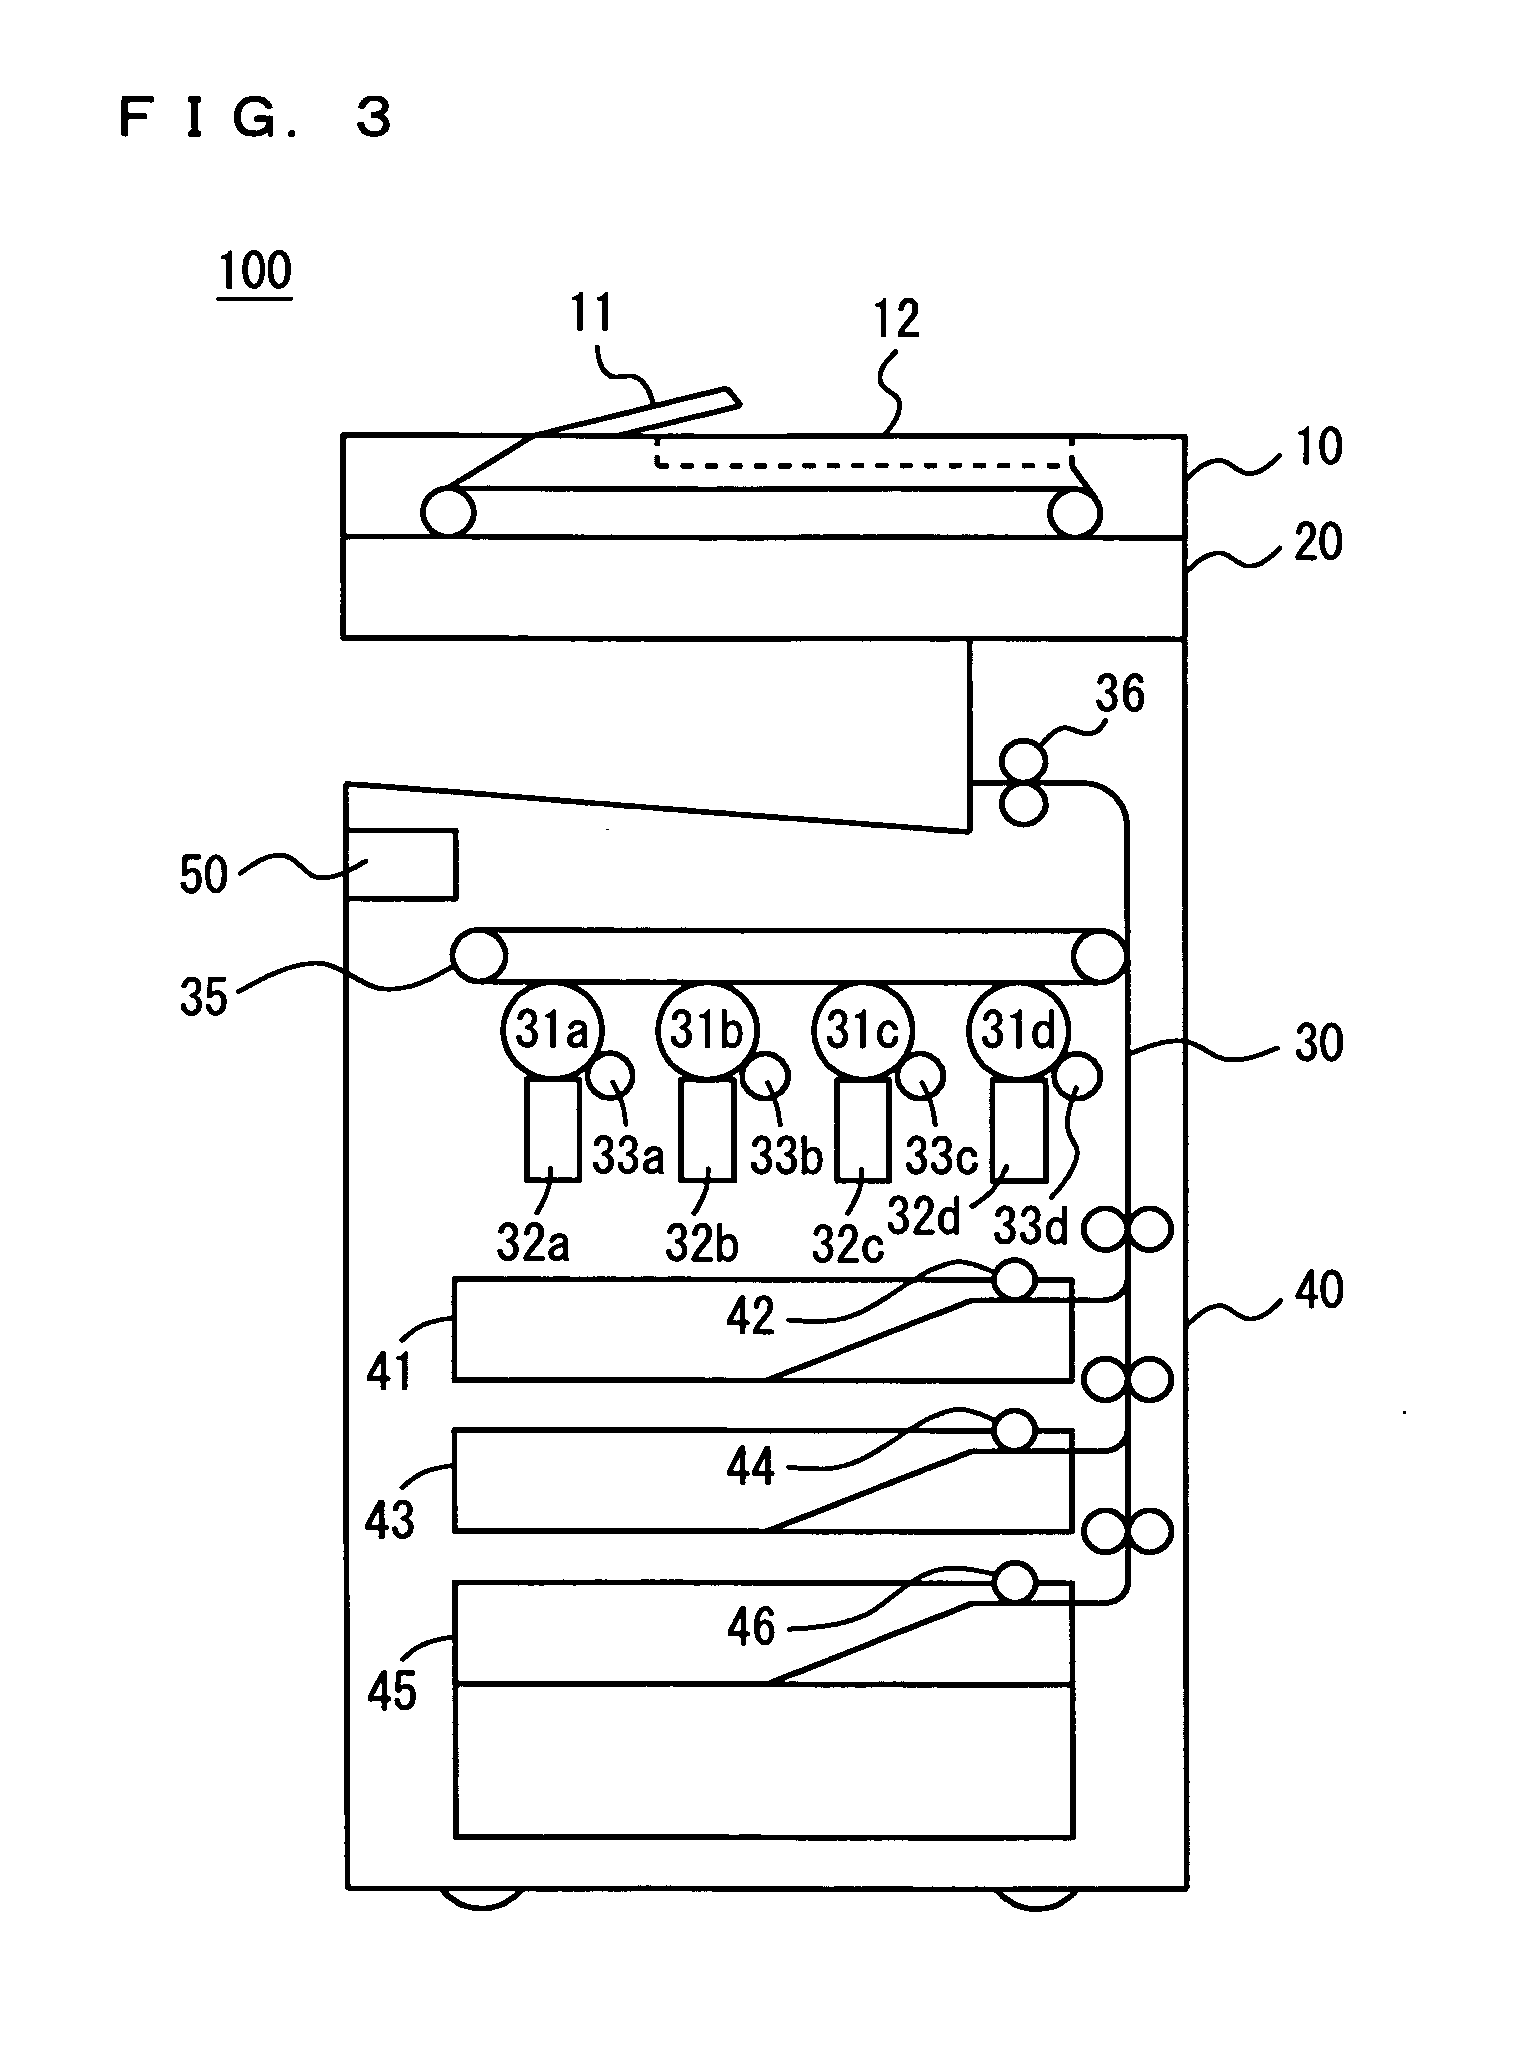 Image-forming apparatus to form an image based on print data, print-job control method, and print-job control program embodied in computer readable medium